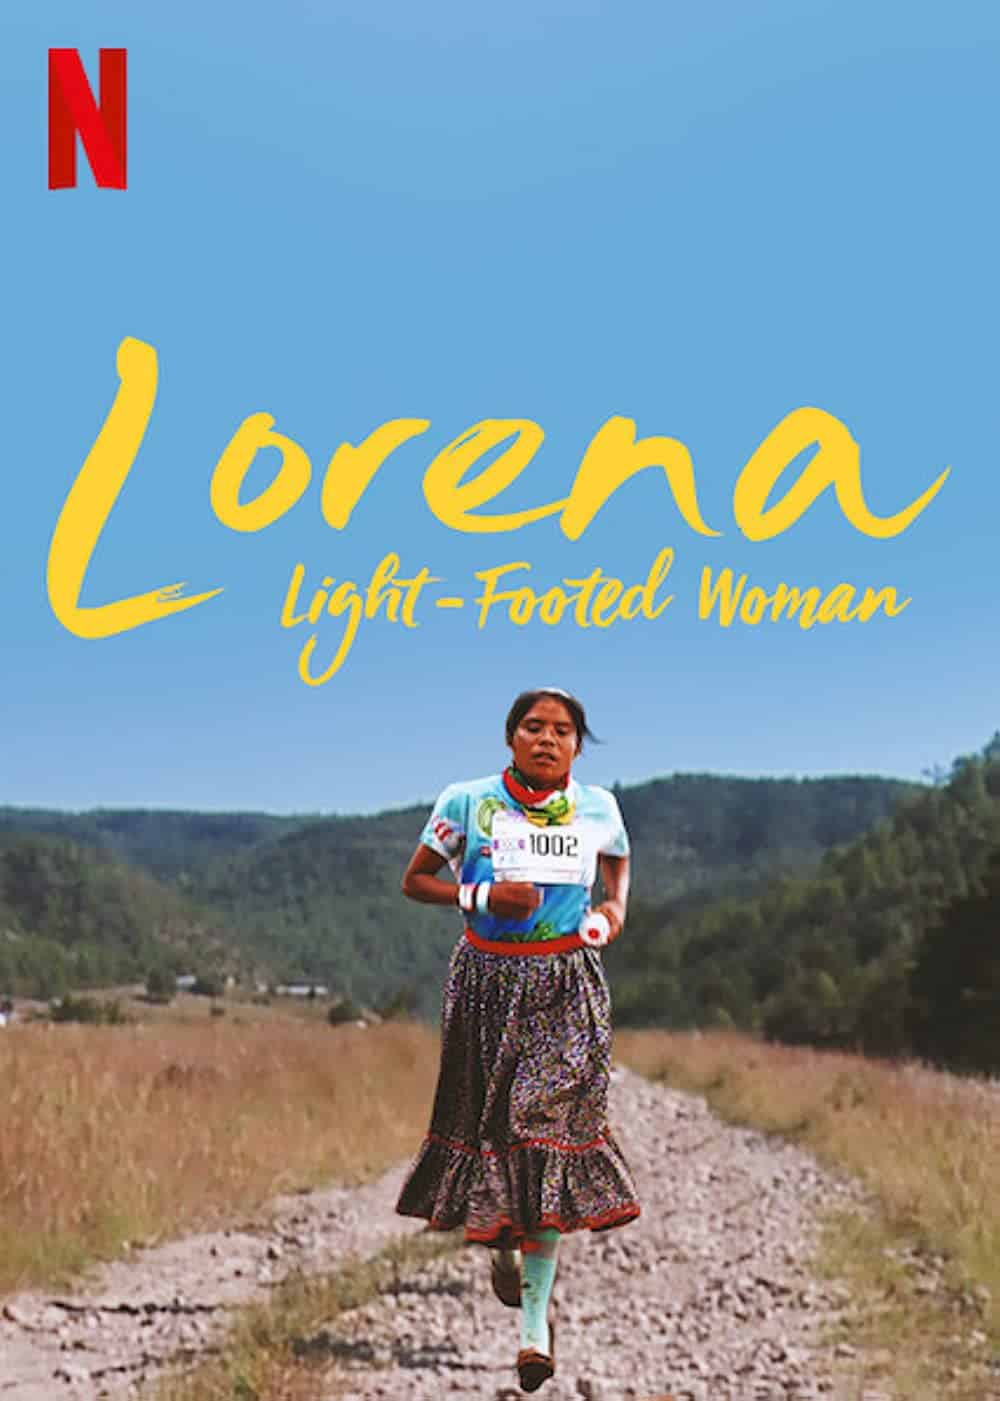 Lorena, Light-footed Woman (2019) 19 Best Running Movies You Can't Miss